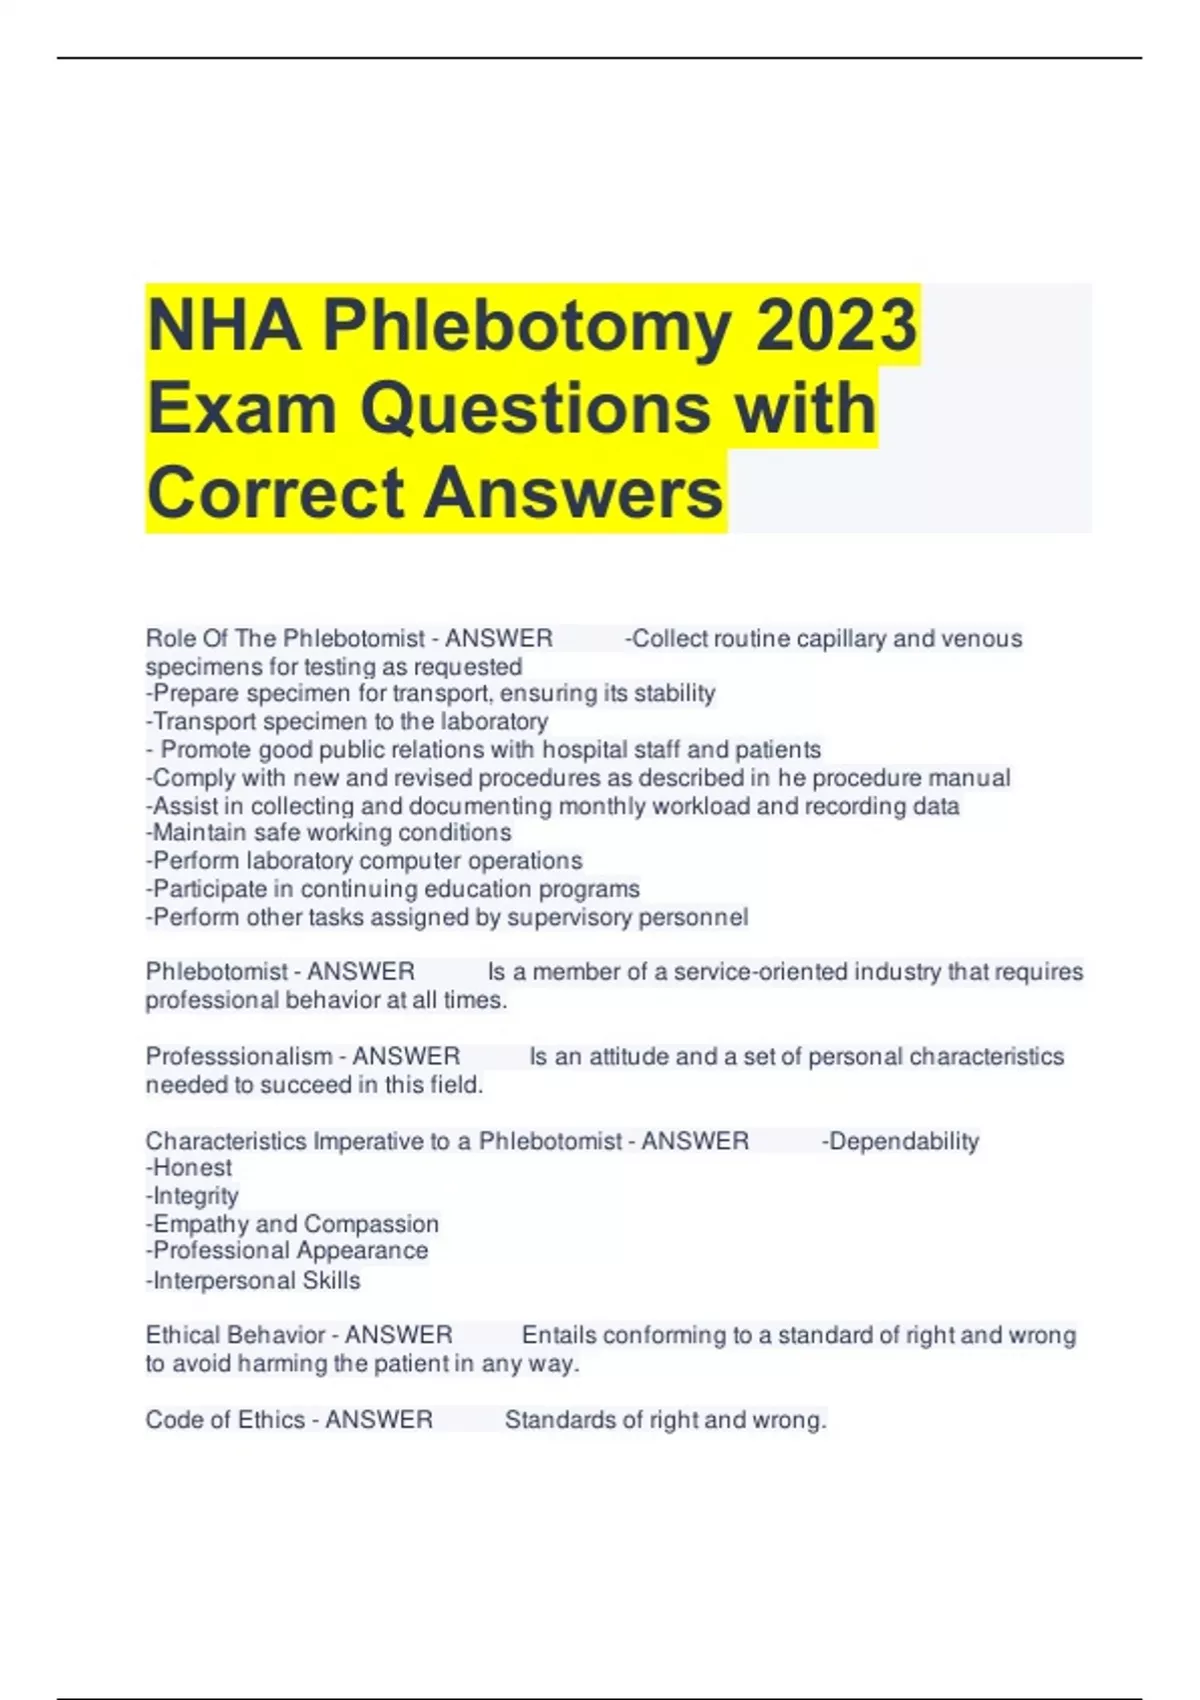 NHA Phlebotomy 2023 Exam Questions with Correct Answers NHA